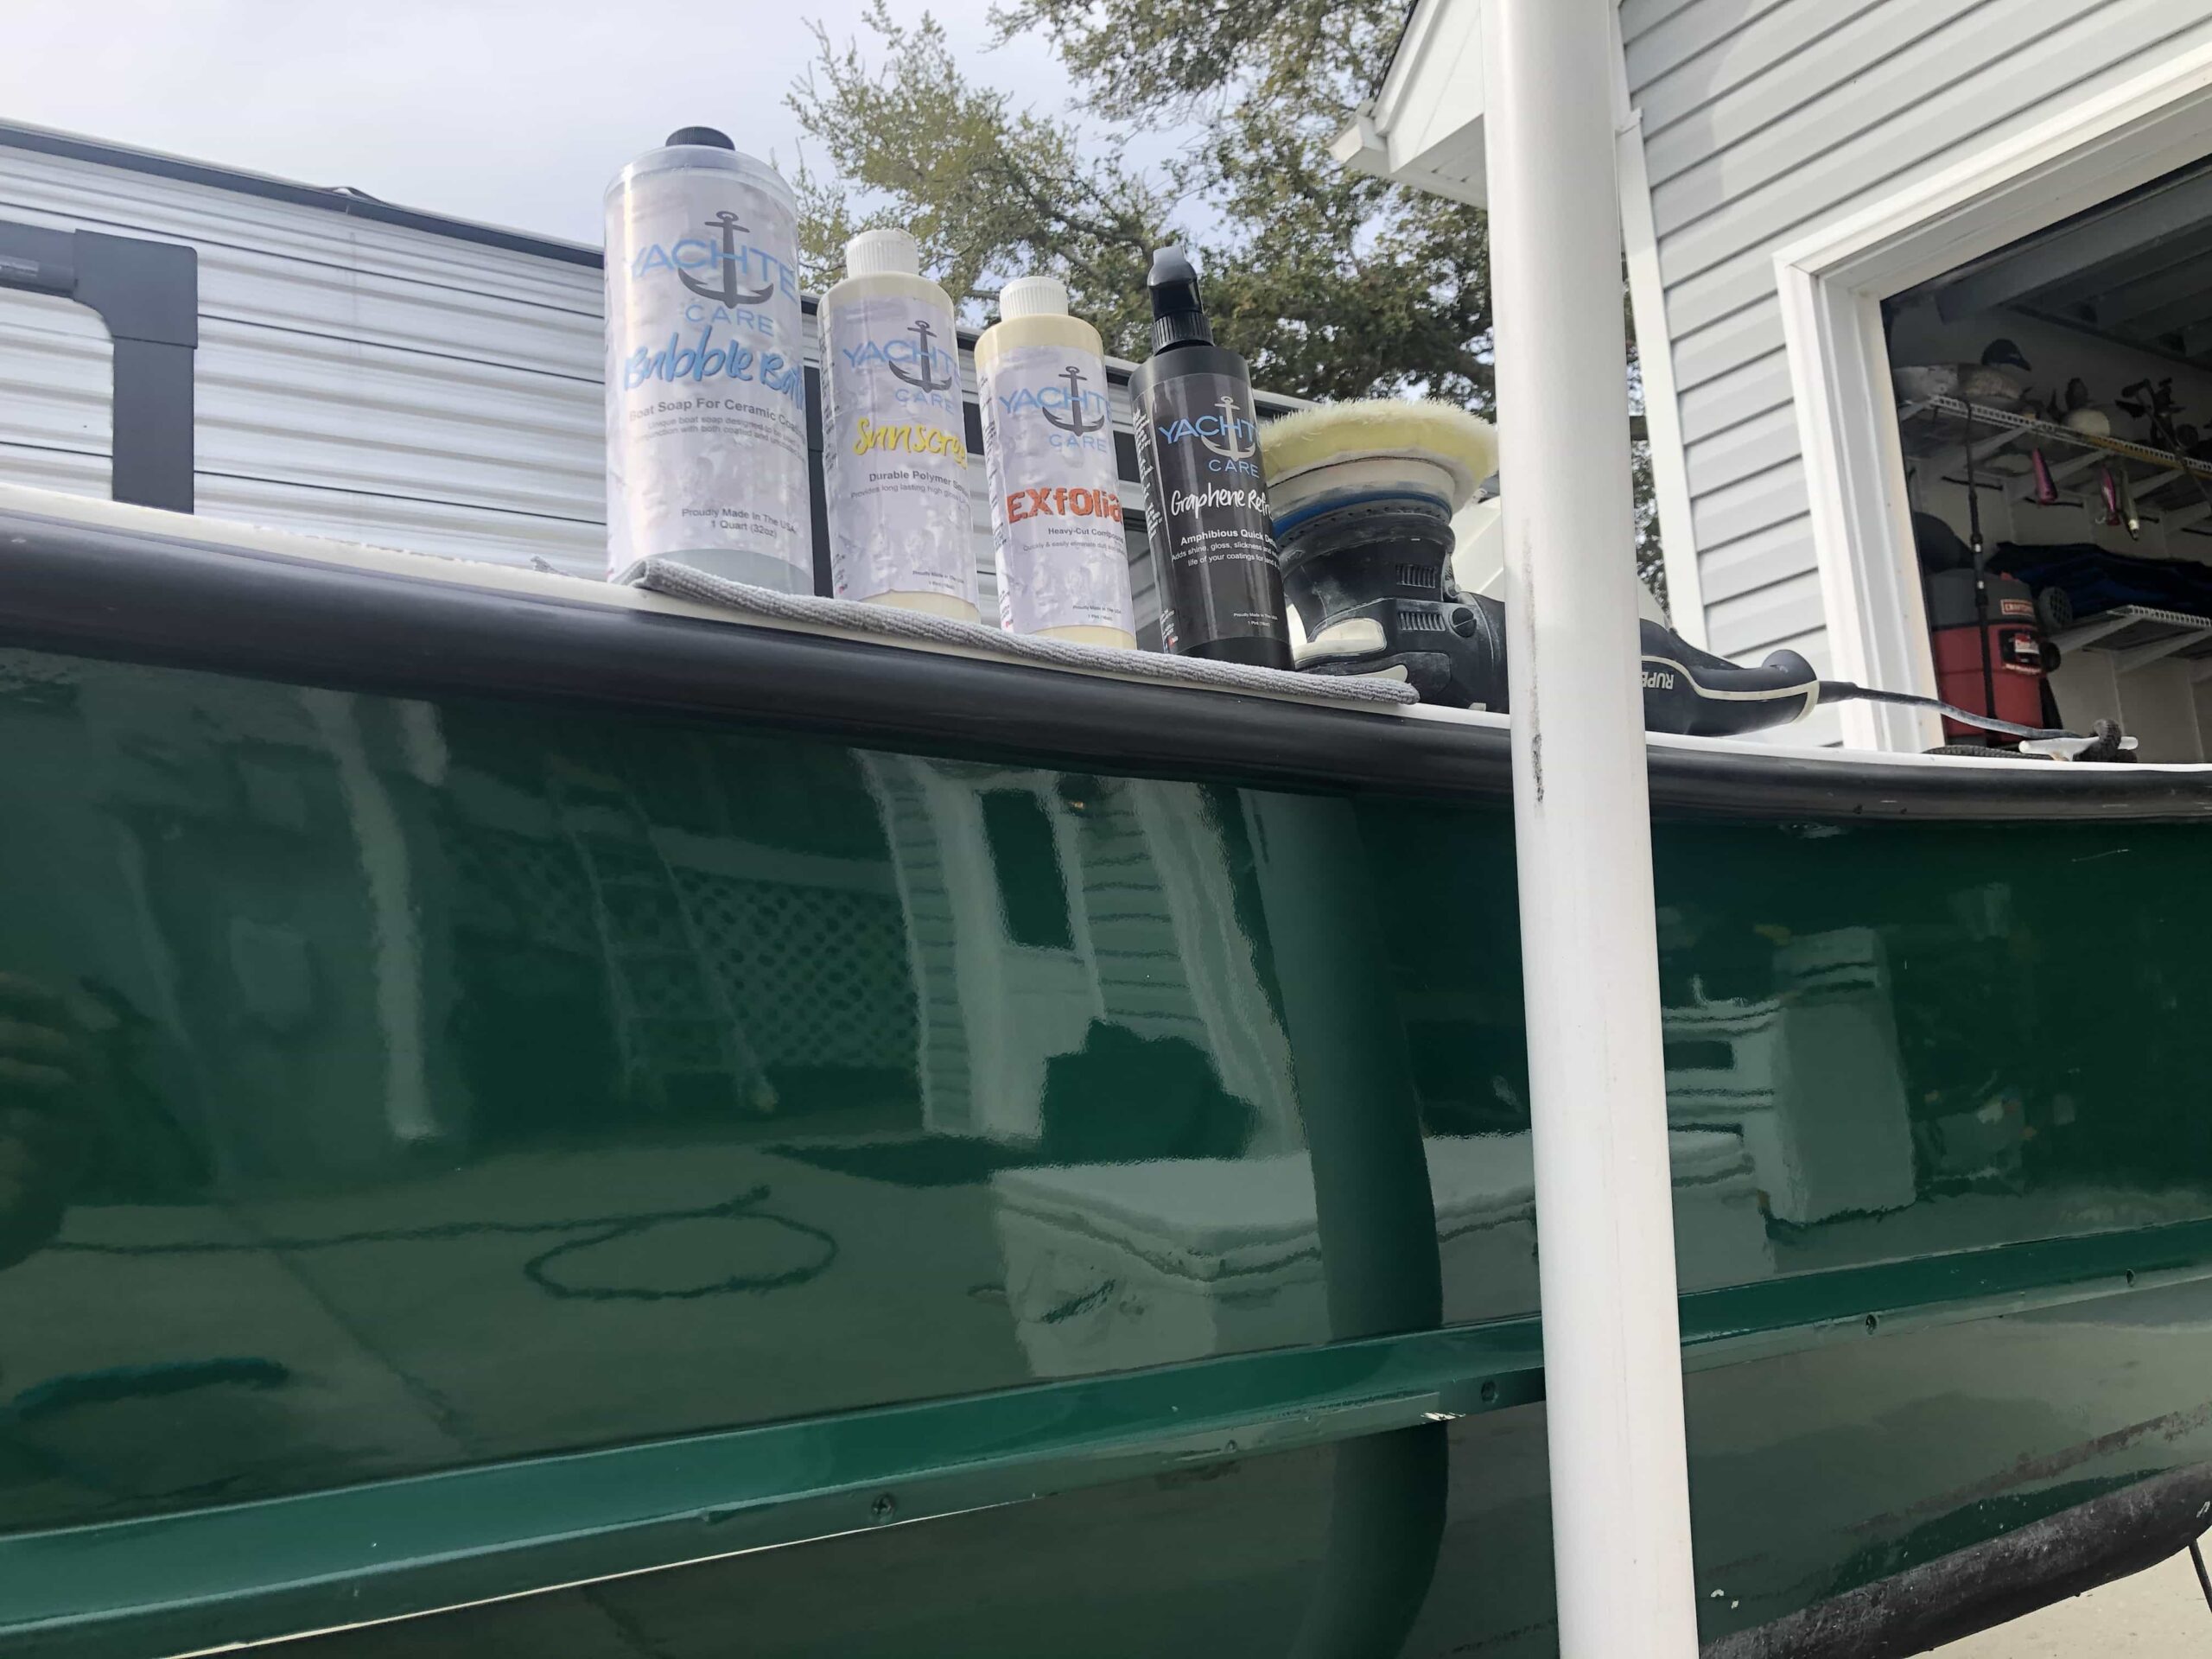 There are many different reasons to wax your boat regularly to keep it protected make cleanup easier and increase resale value.